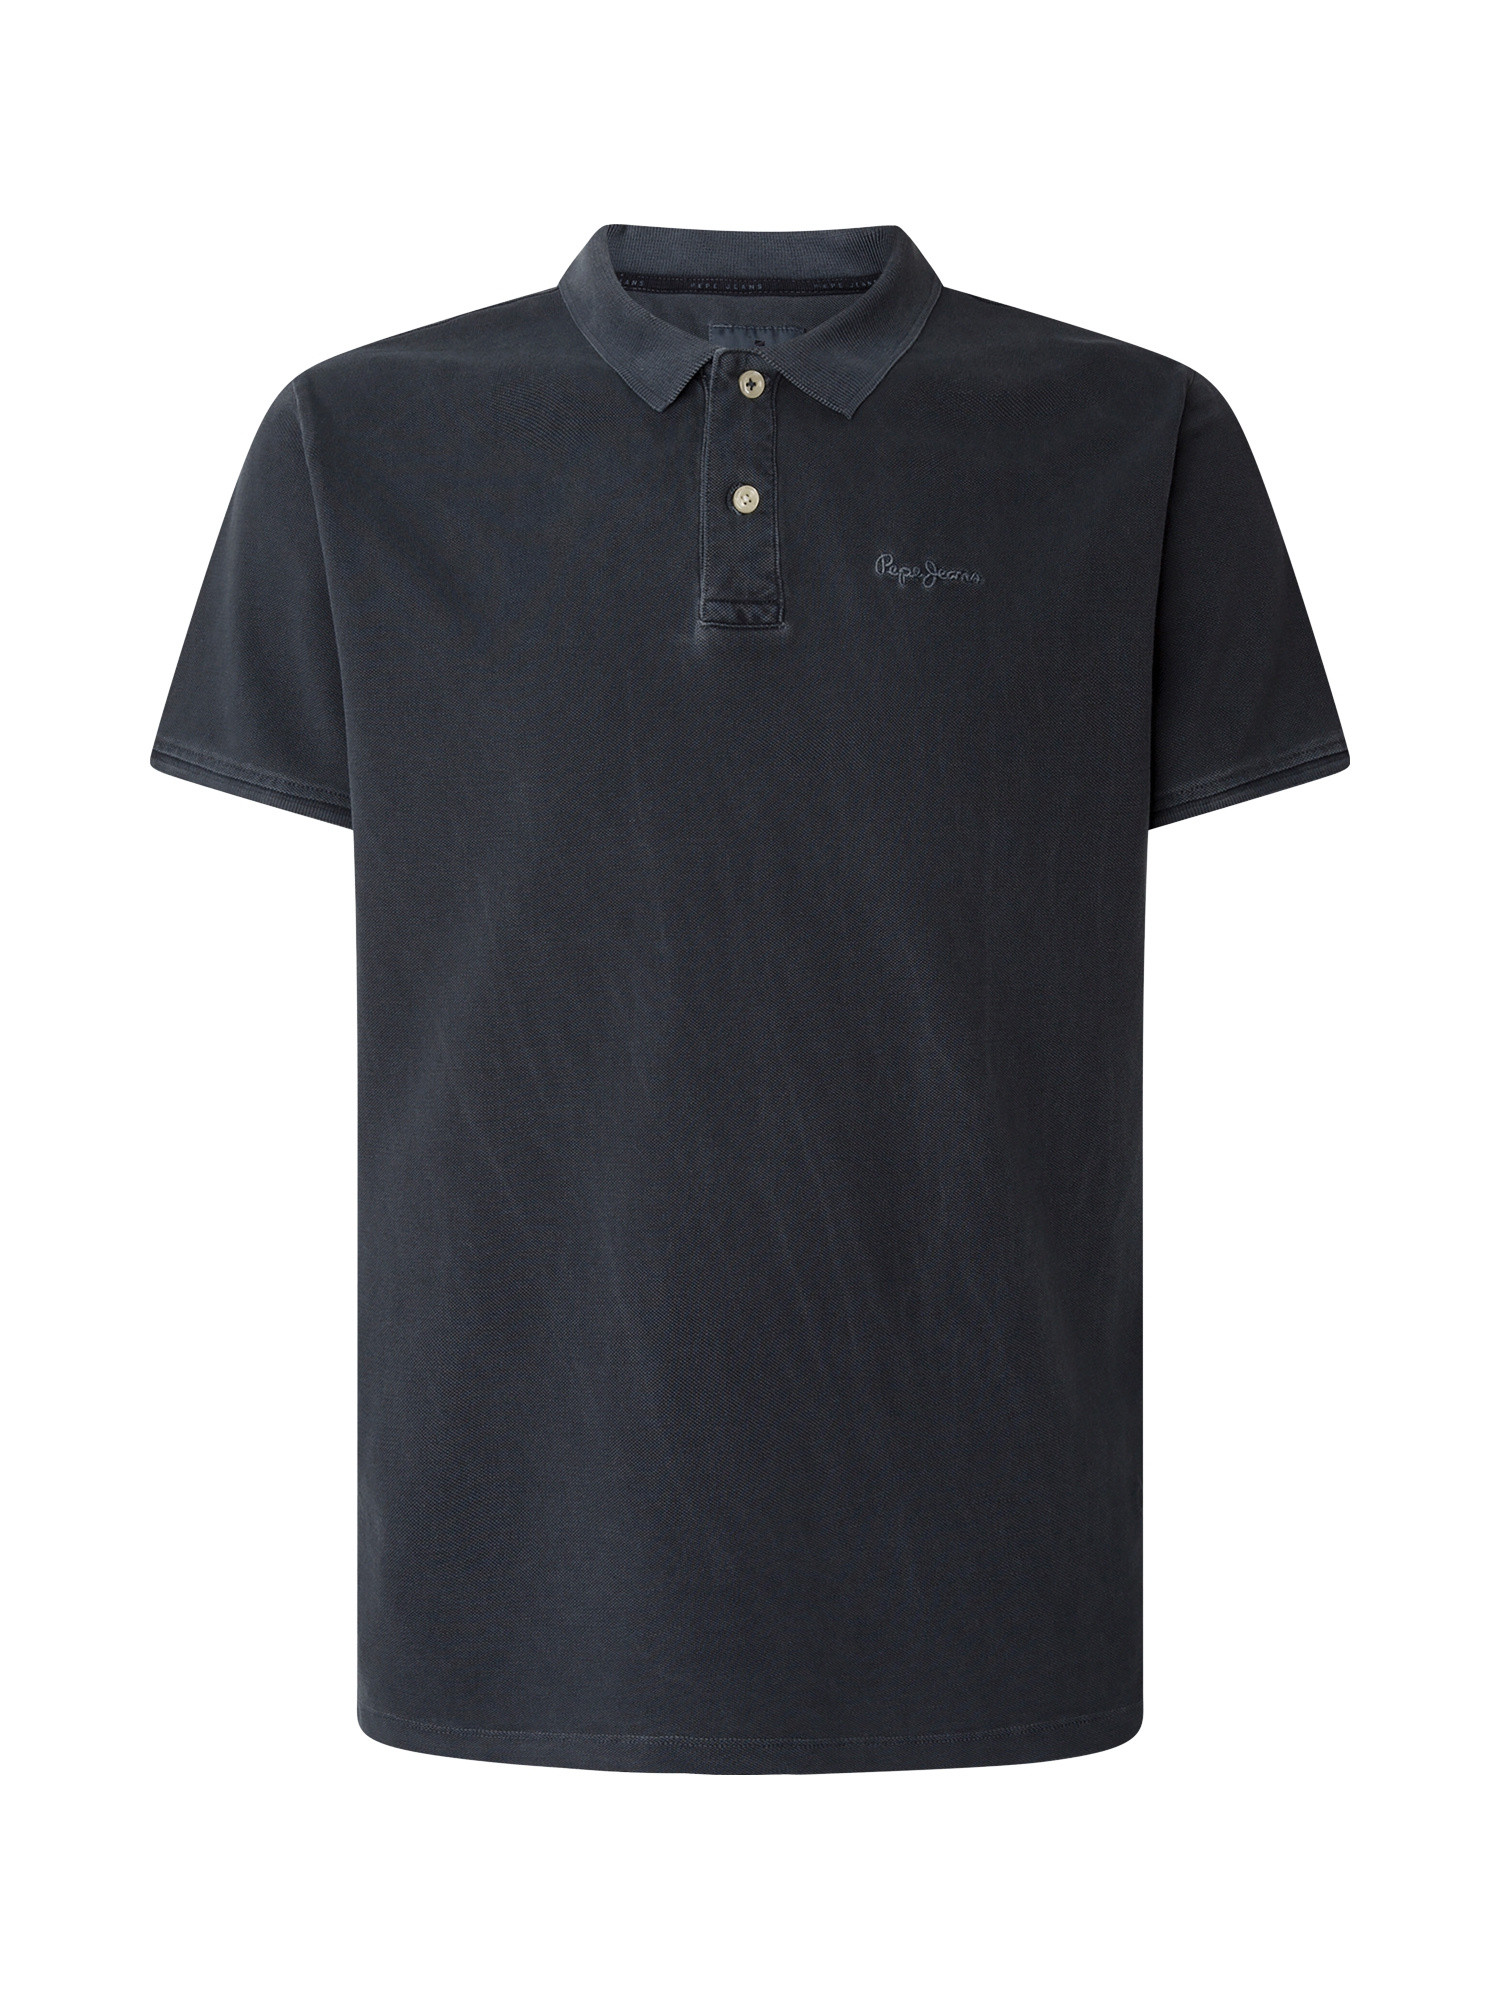 Pepe Jeans - Polo con logo in cotone, Blu scuro, large image number 0